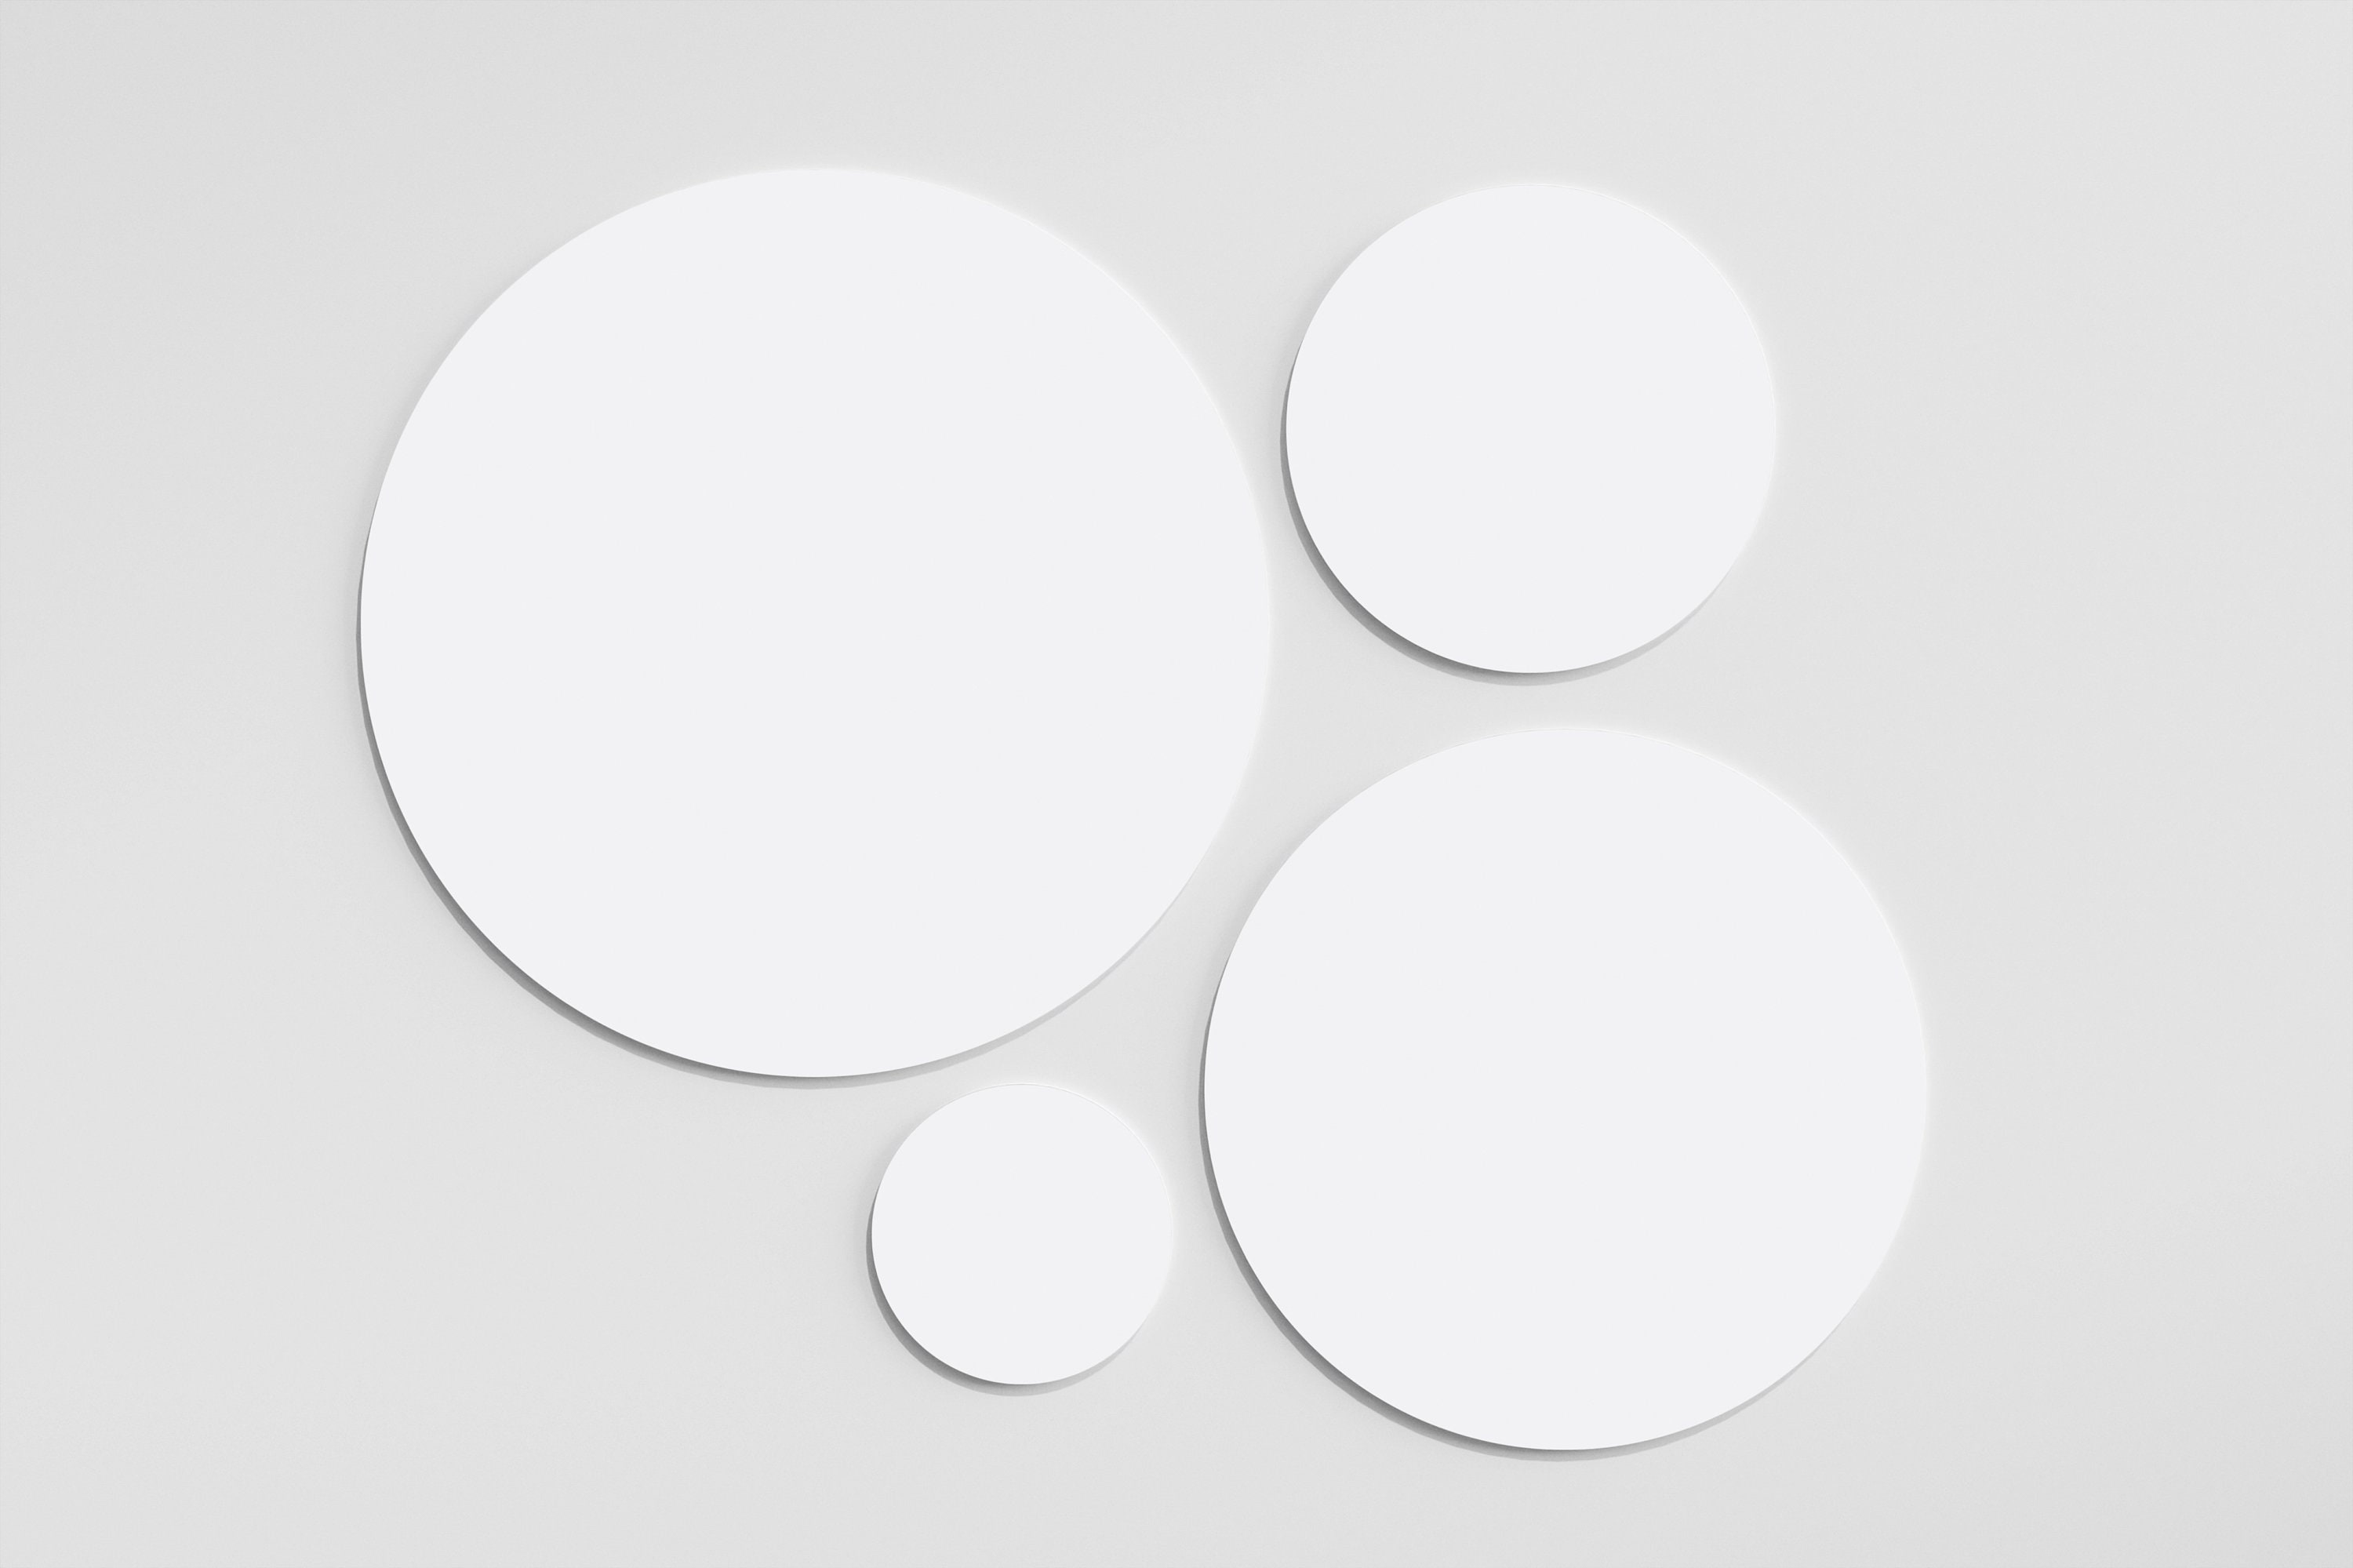 White Round Acrylic Blanks | Circle For Diy Wedding Kits & Crafts. Available in Large, Small Custom Sizes